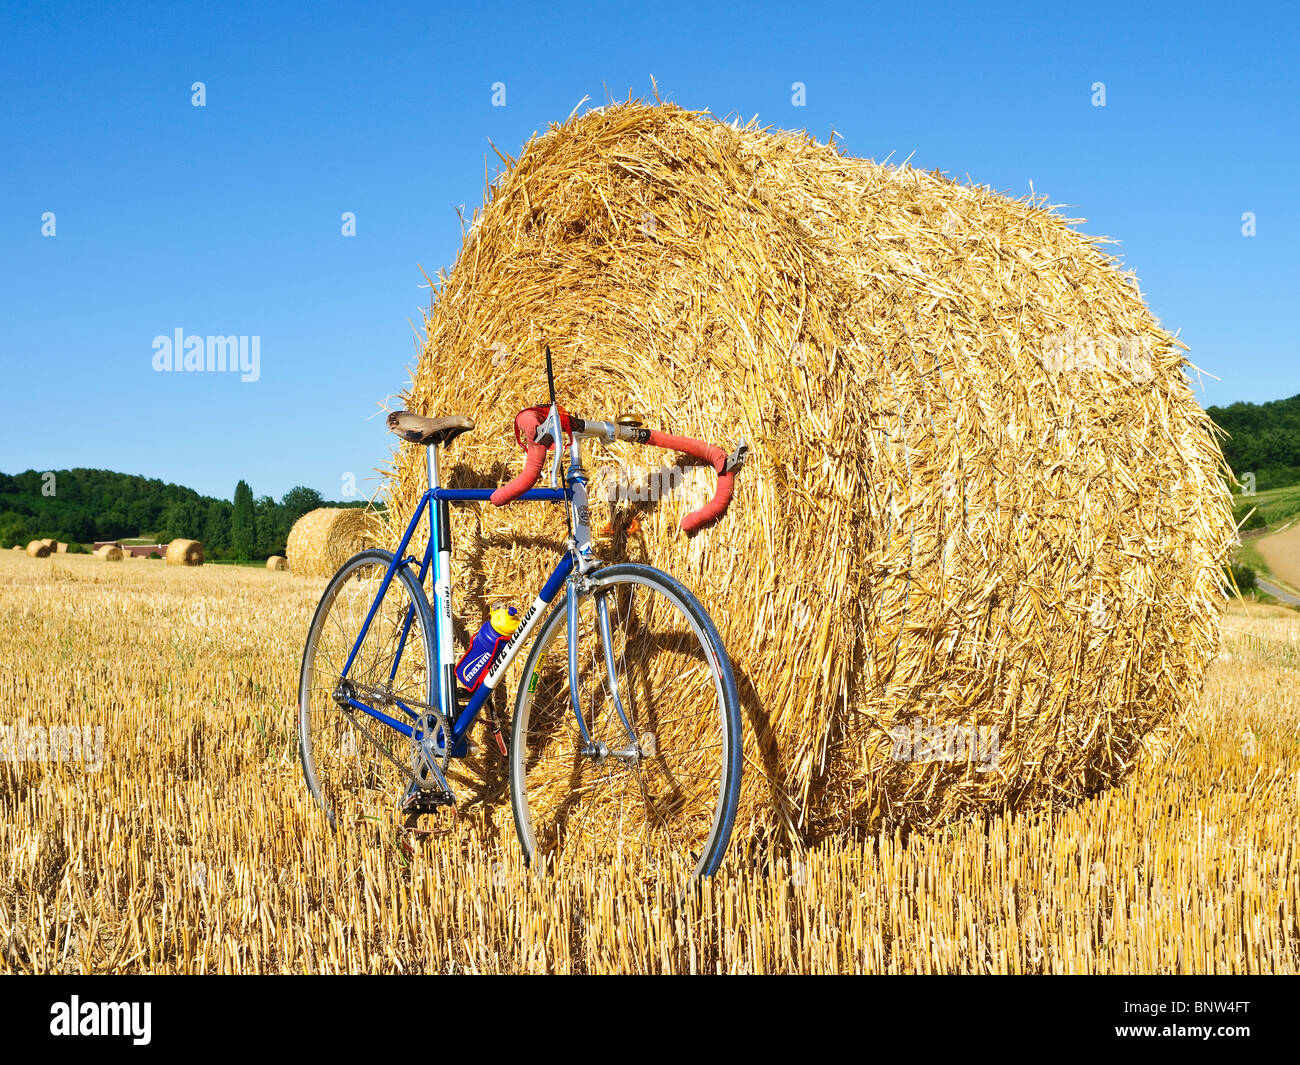 Fixed wheel bicycle in front of round straw bale - Indre-et-Loire, France. Stock Photo